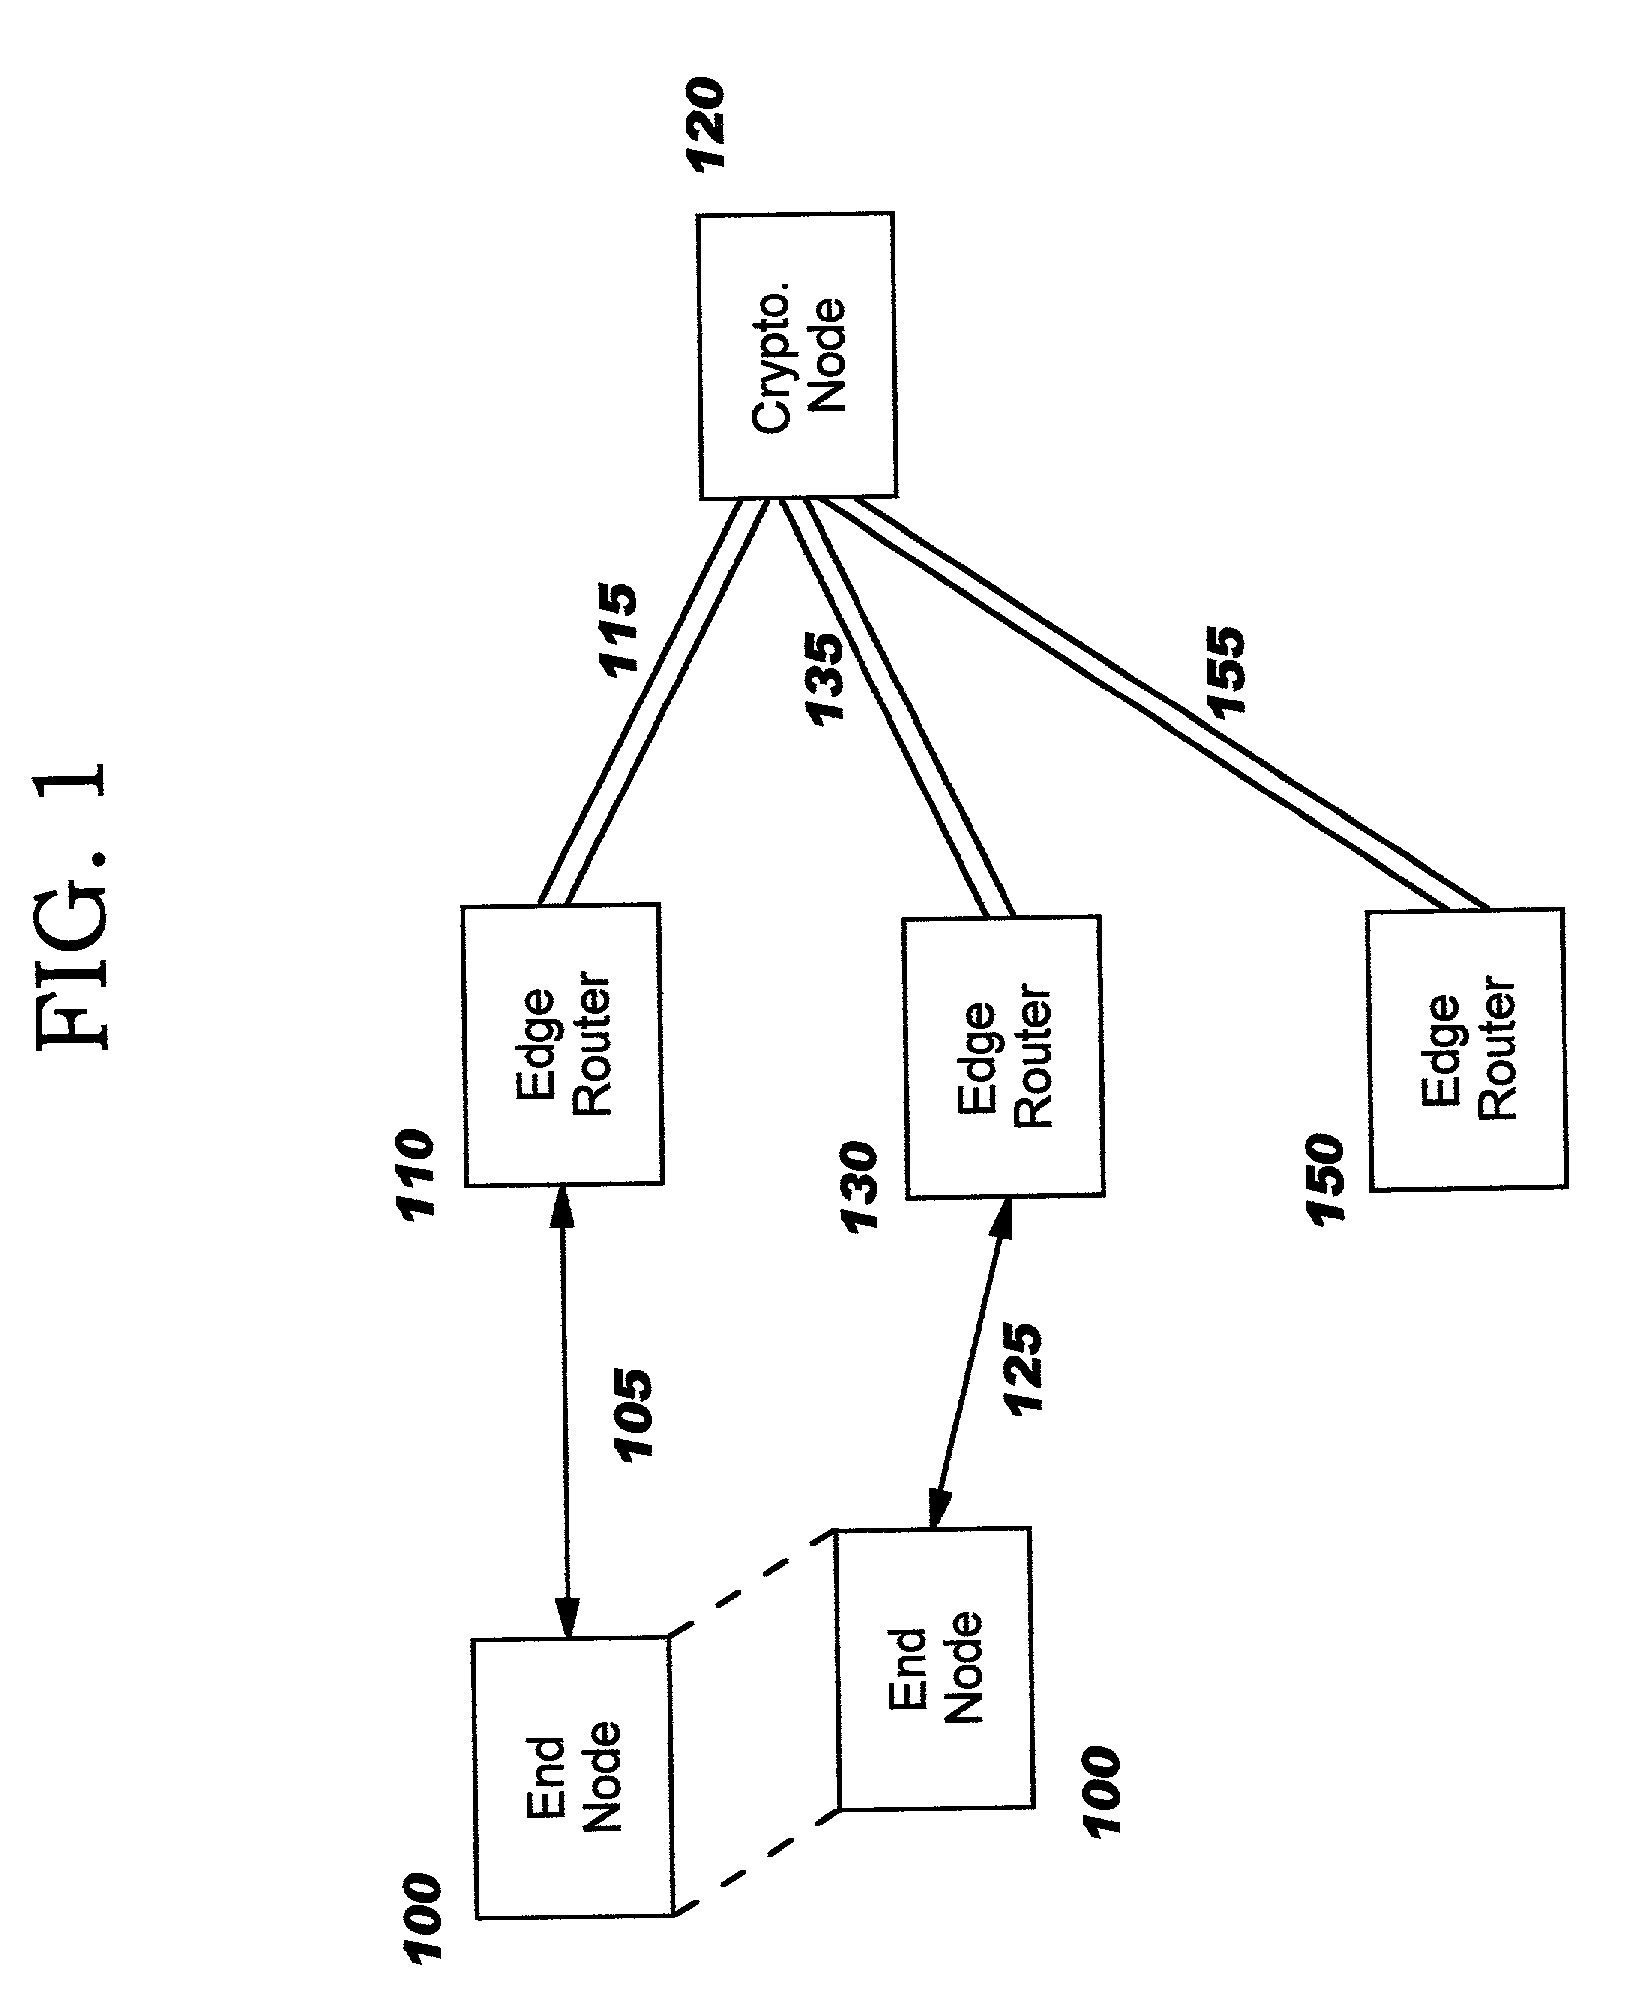 Enabling secure communication in a clustered or distributed architecture